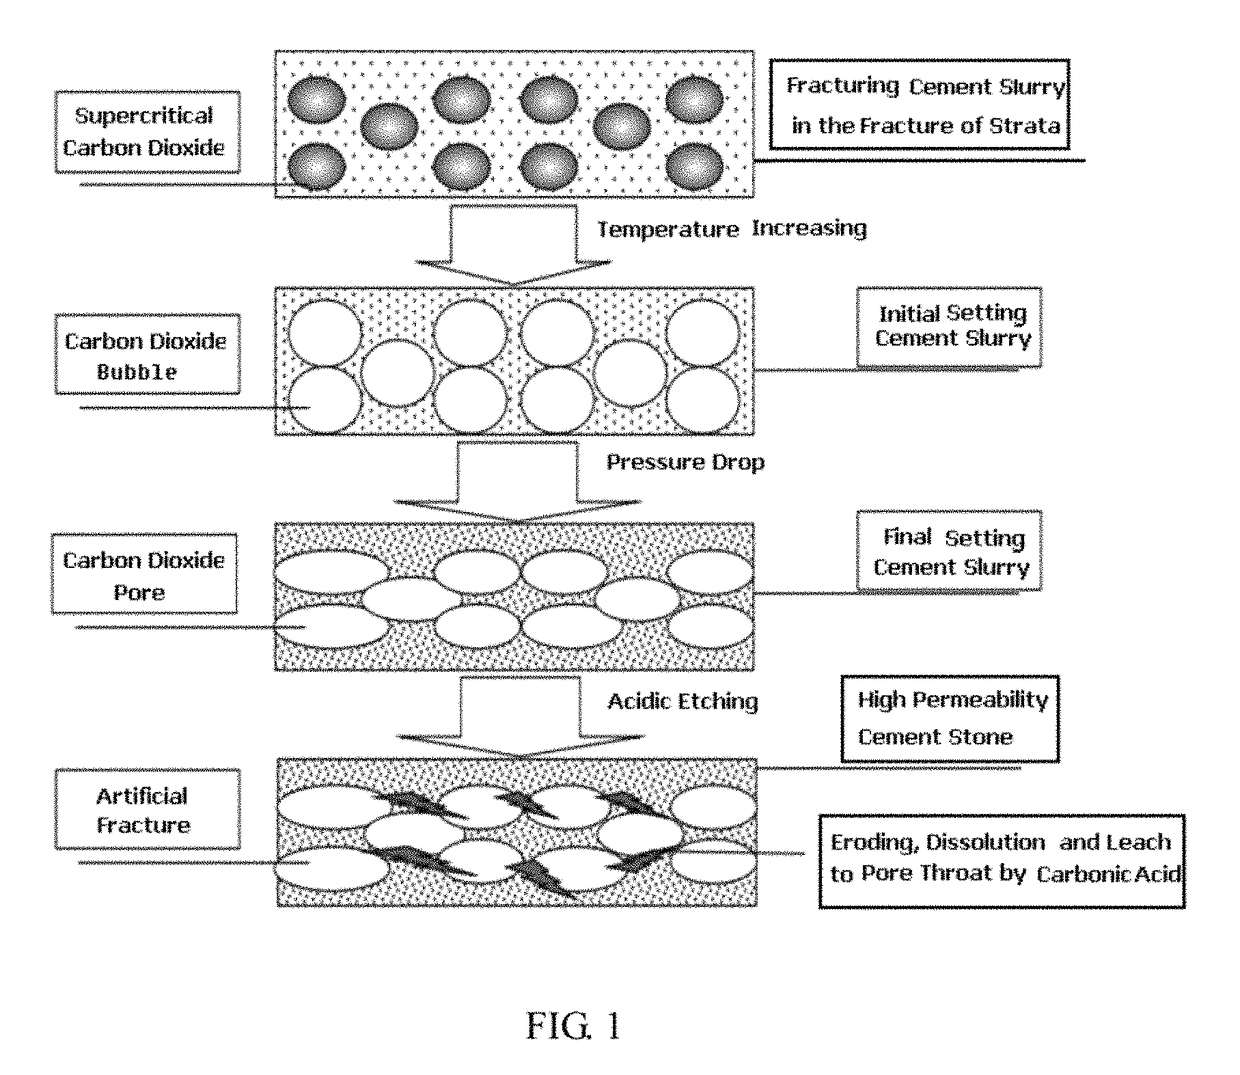 Permeable cement stone fracturing exploitation method for non-conventional oil and gas layer